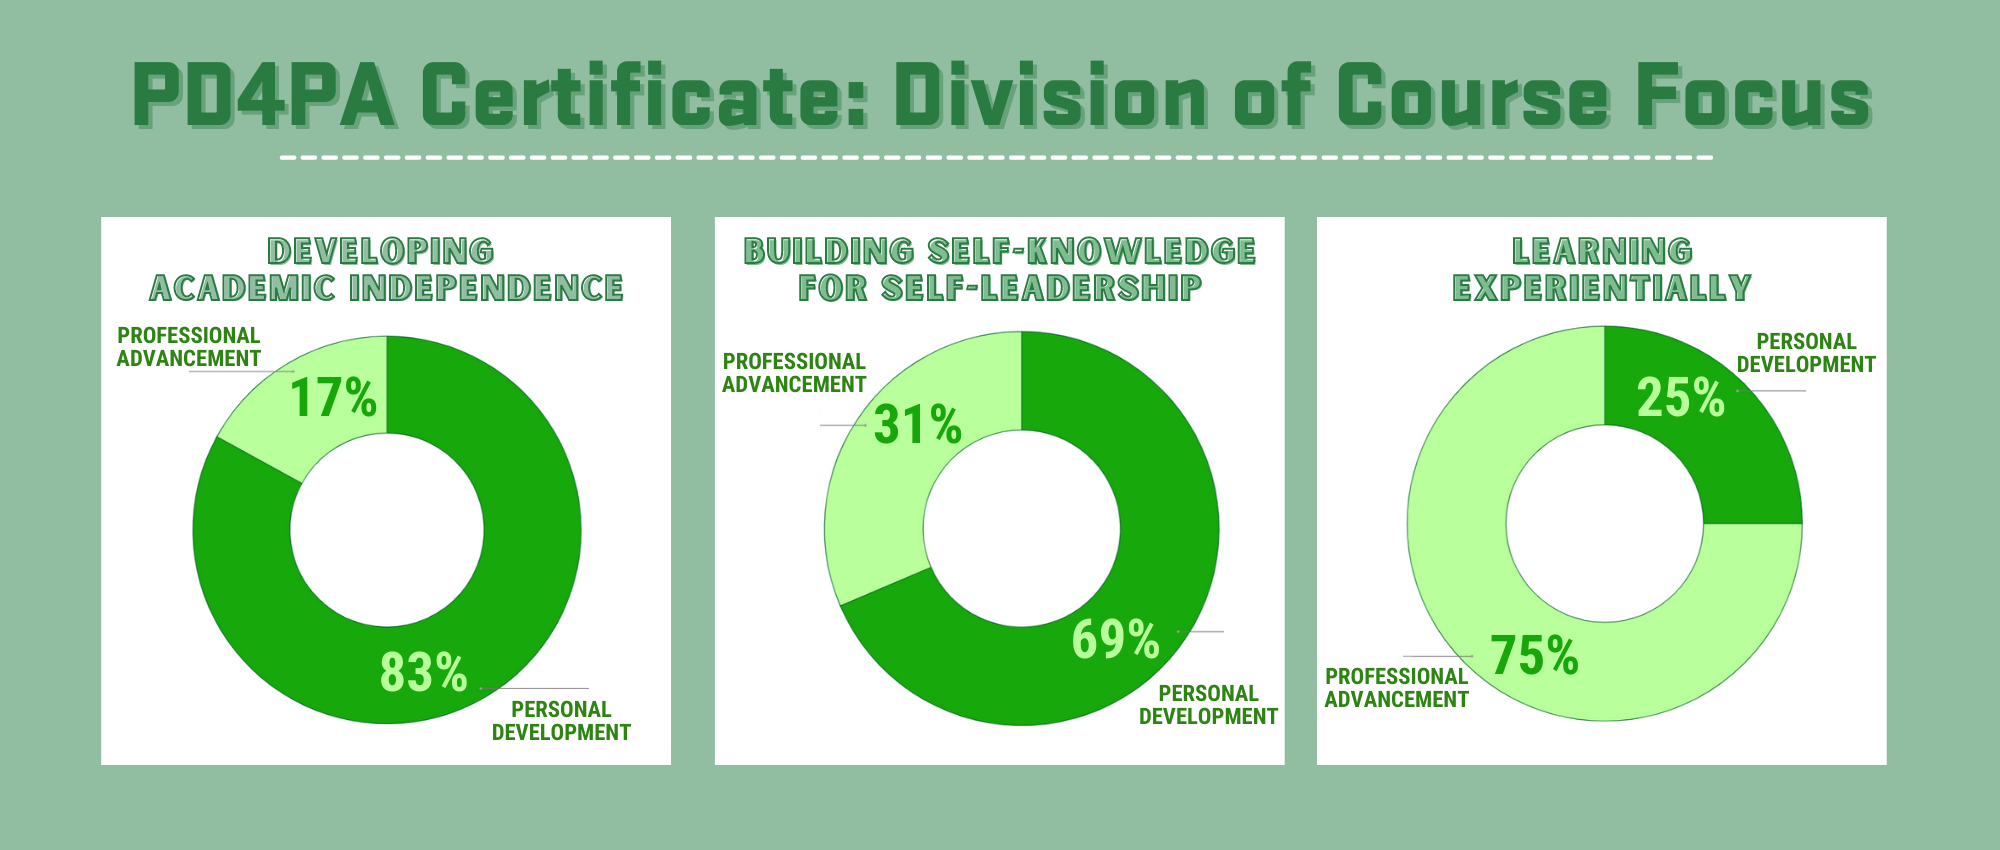 Breakdown of PD4PA Sections with Professional Advancement and Personal Development